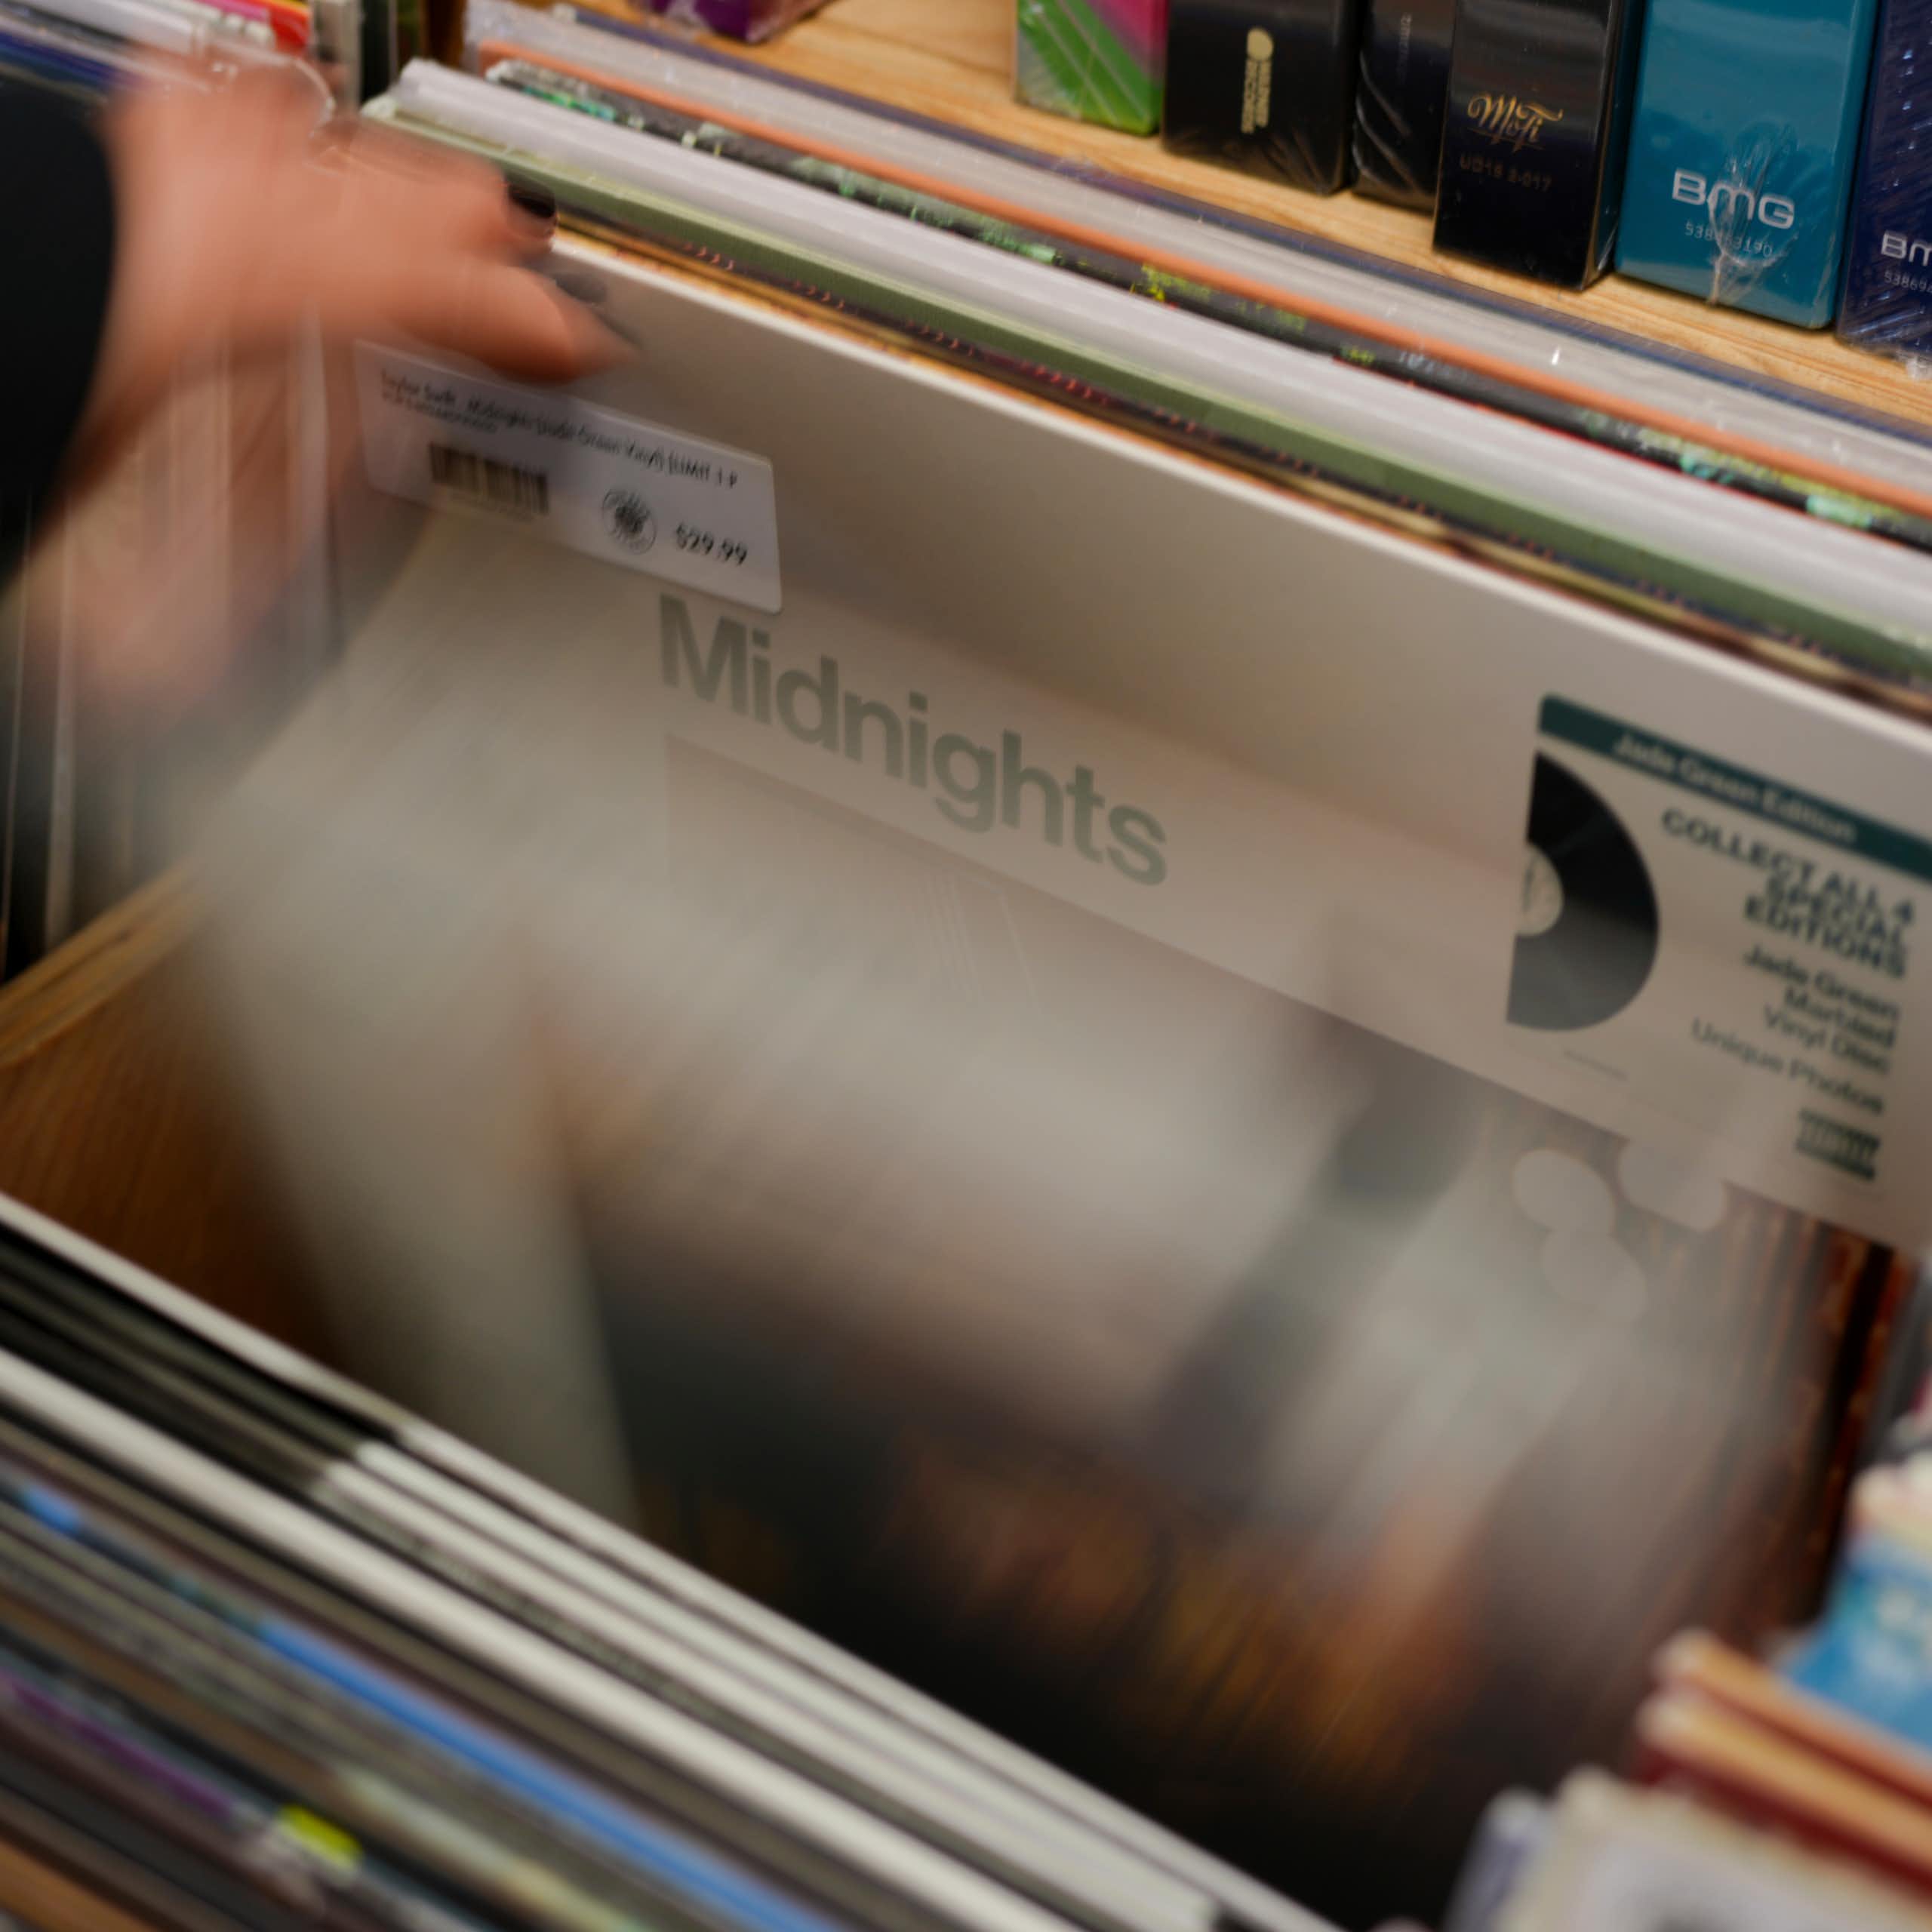 A hand seen flipping through records and the word 'midnights' is seen on one album.